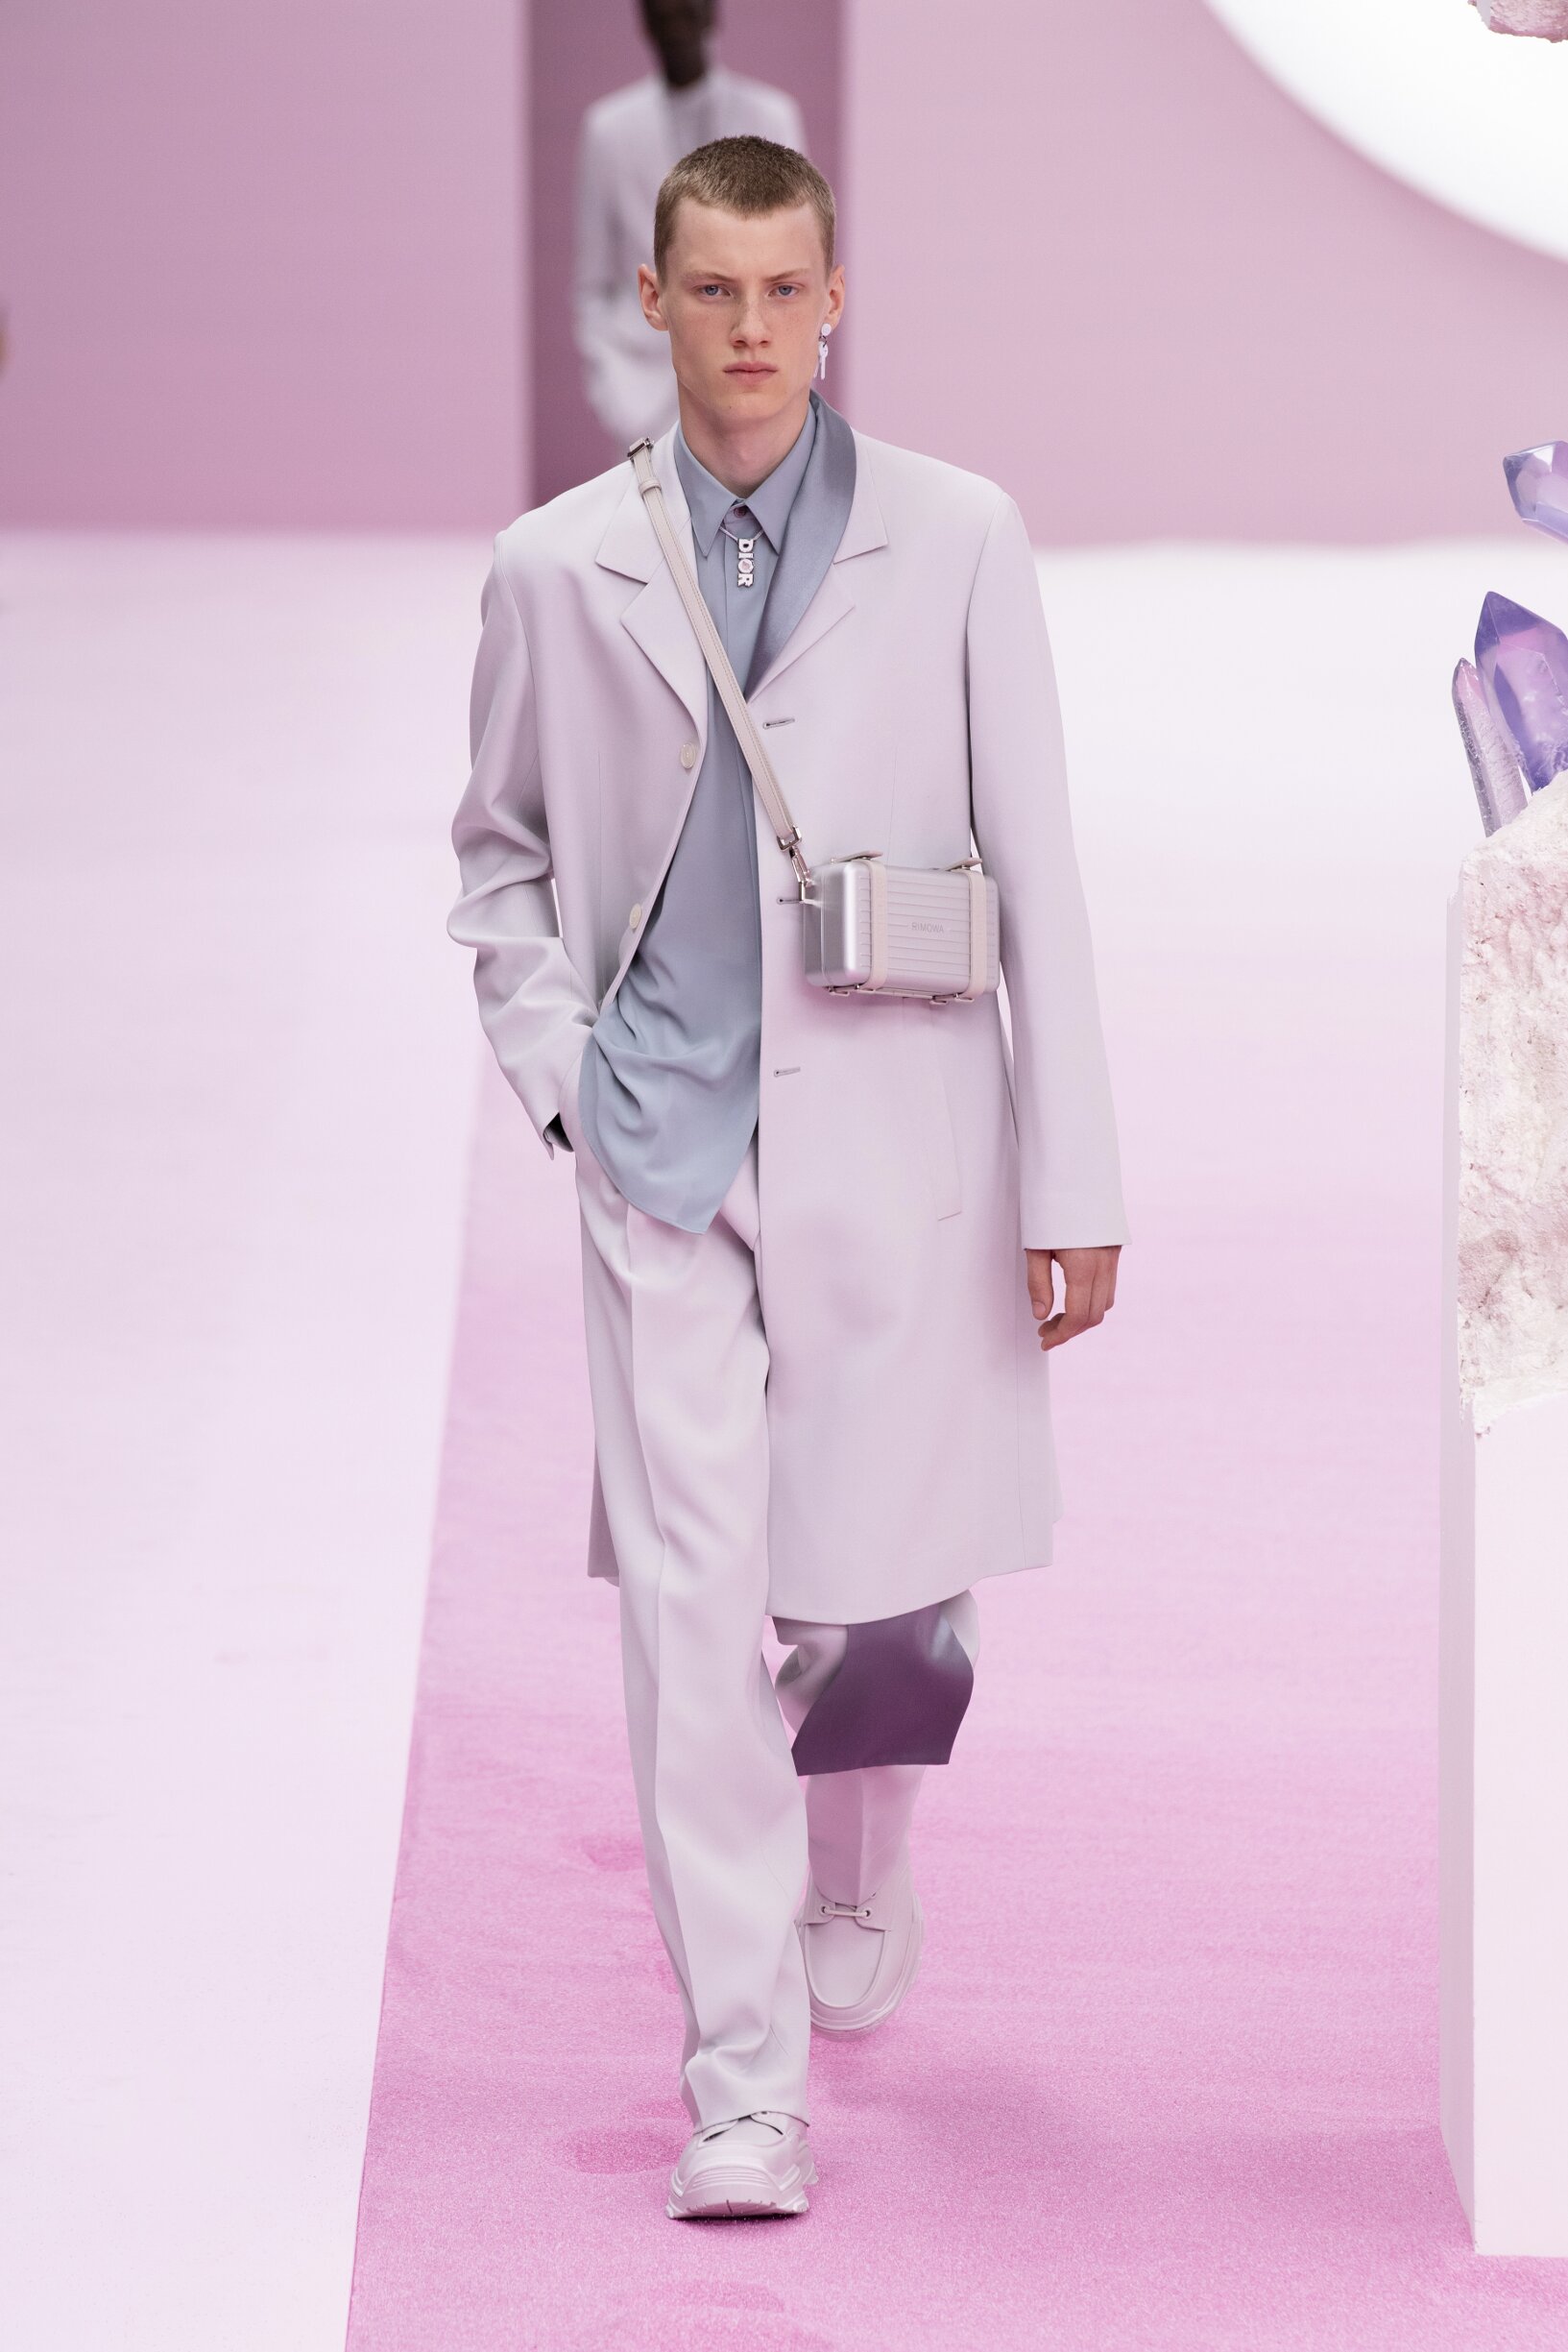 DIOR SPRING SUMMER 2020 MEN’S COLLECTION | The Skinny Beep